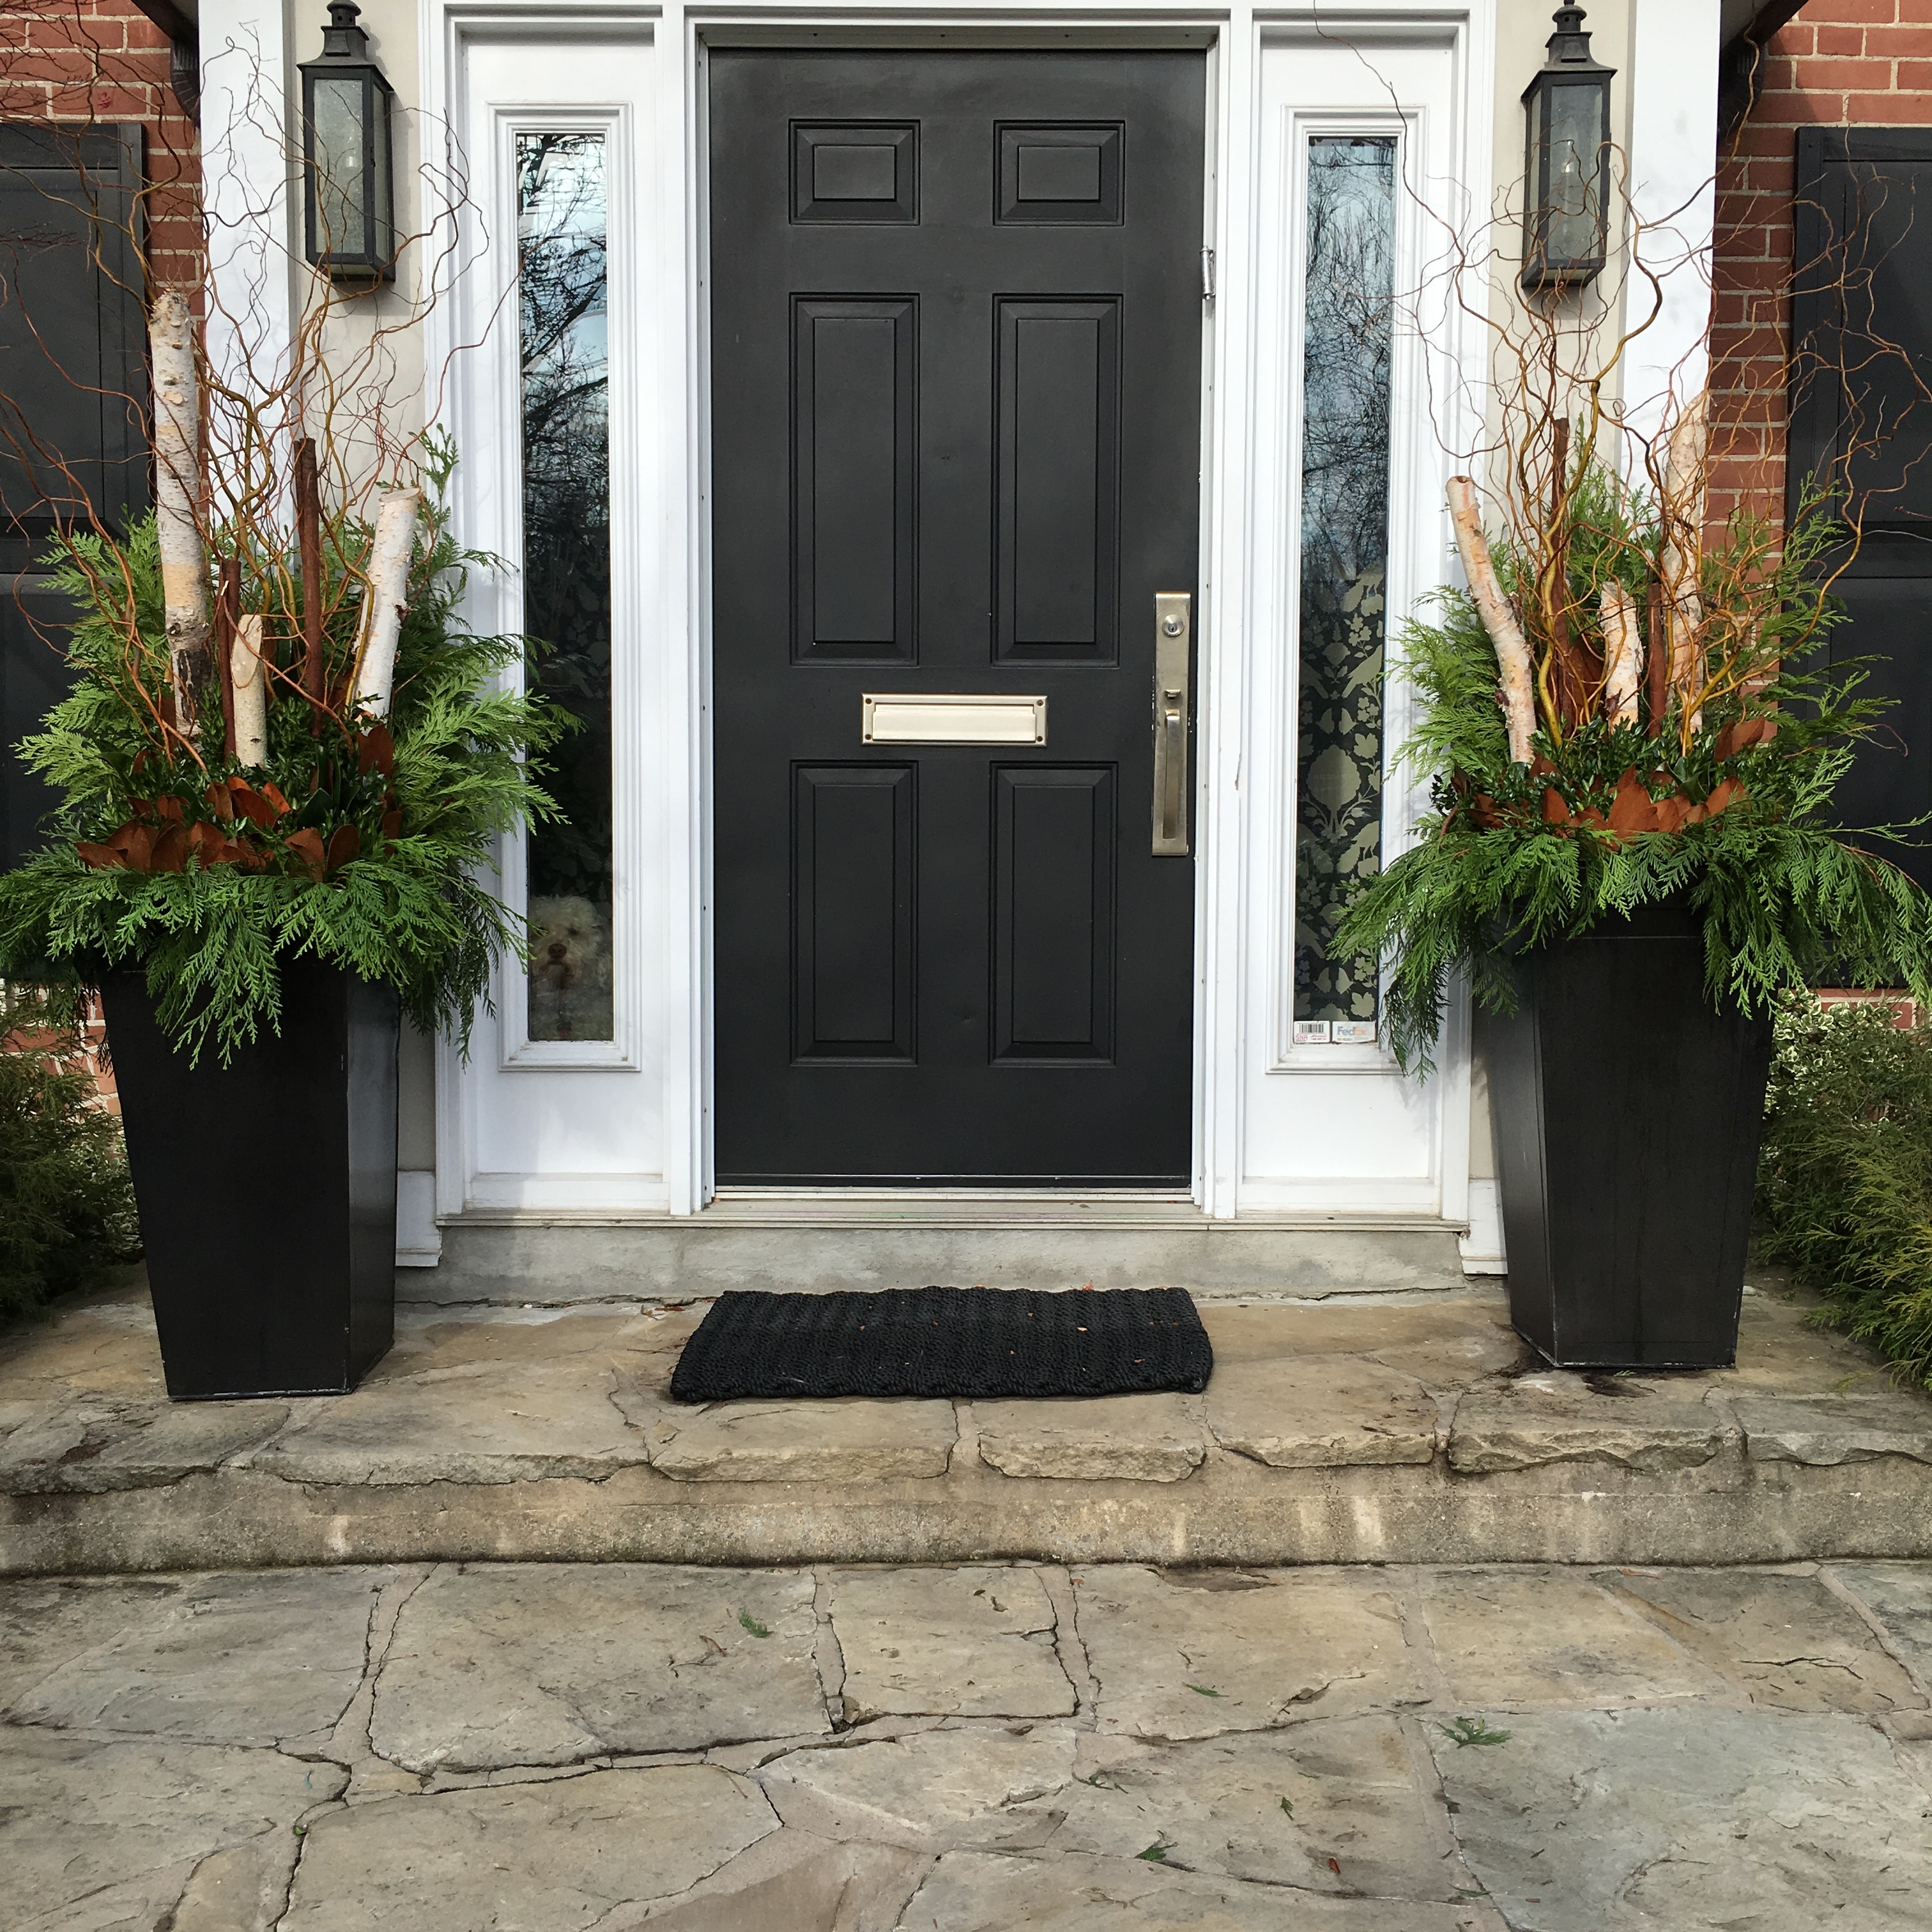 Outdoor winter planters, front entry pots, winter front entry pots